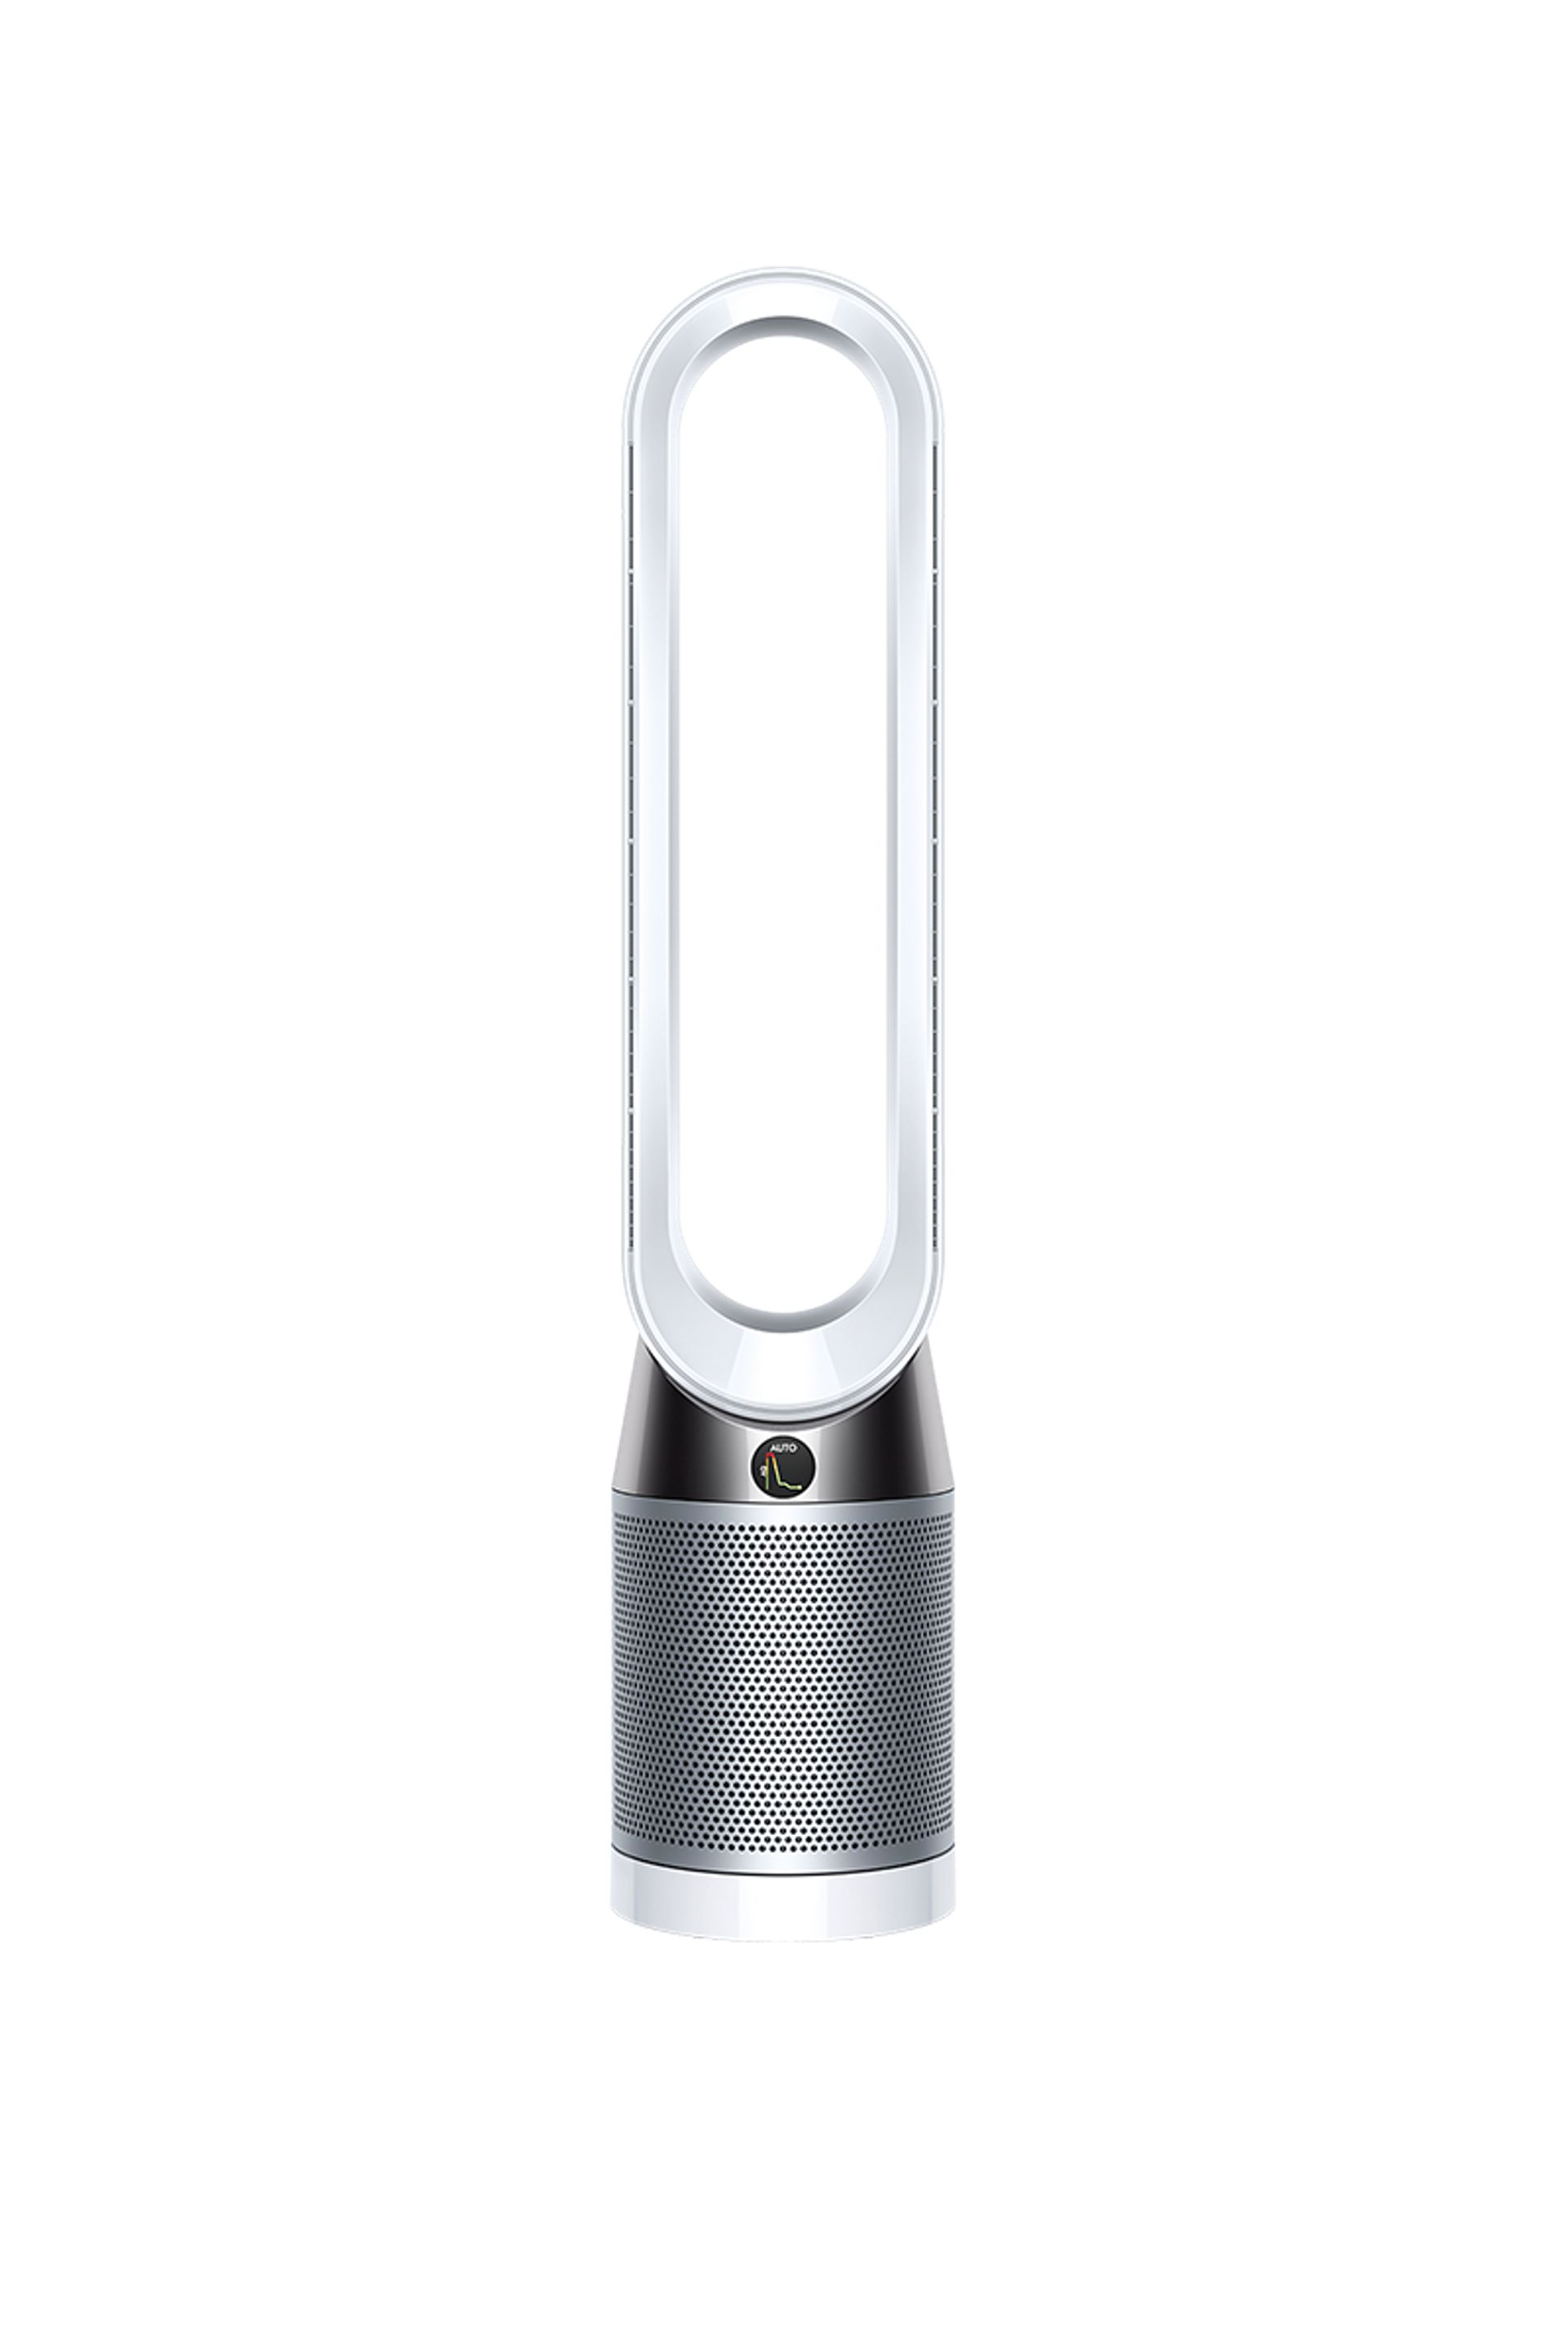 Dyson Pure Cool purifying tower fan white silver